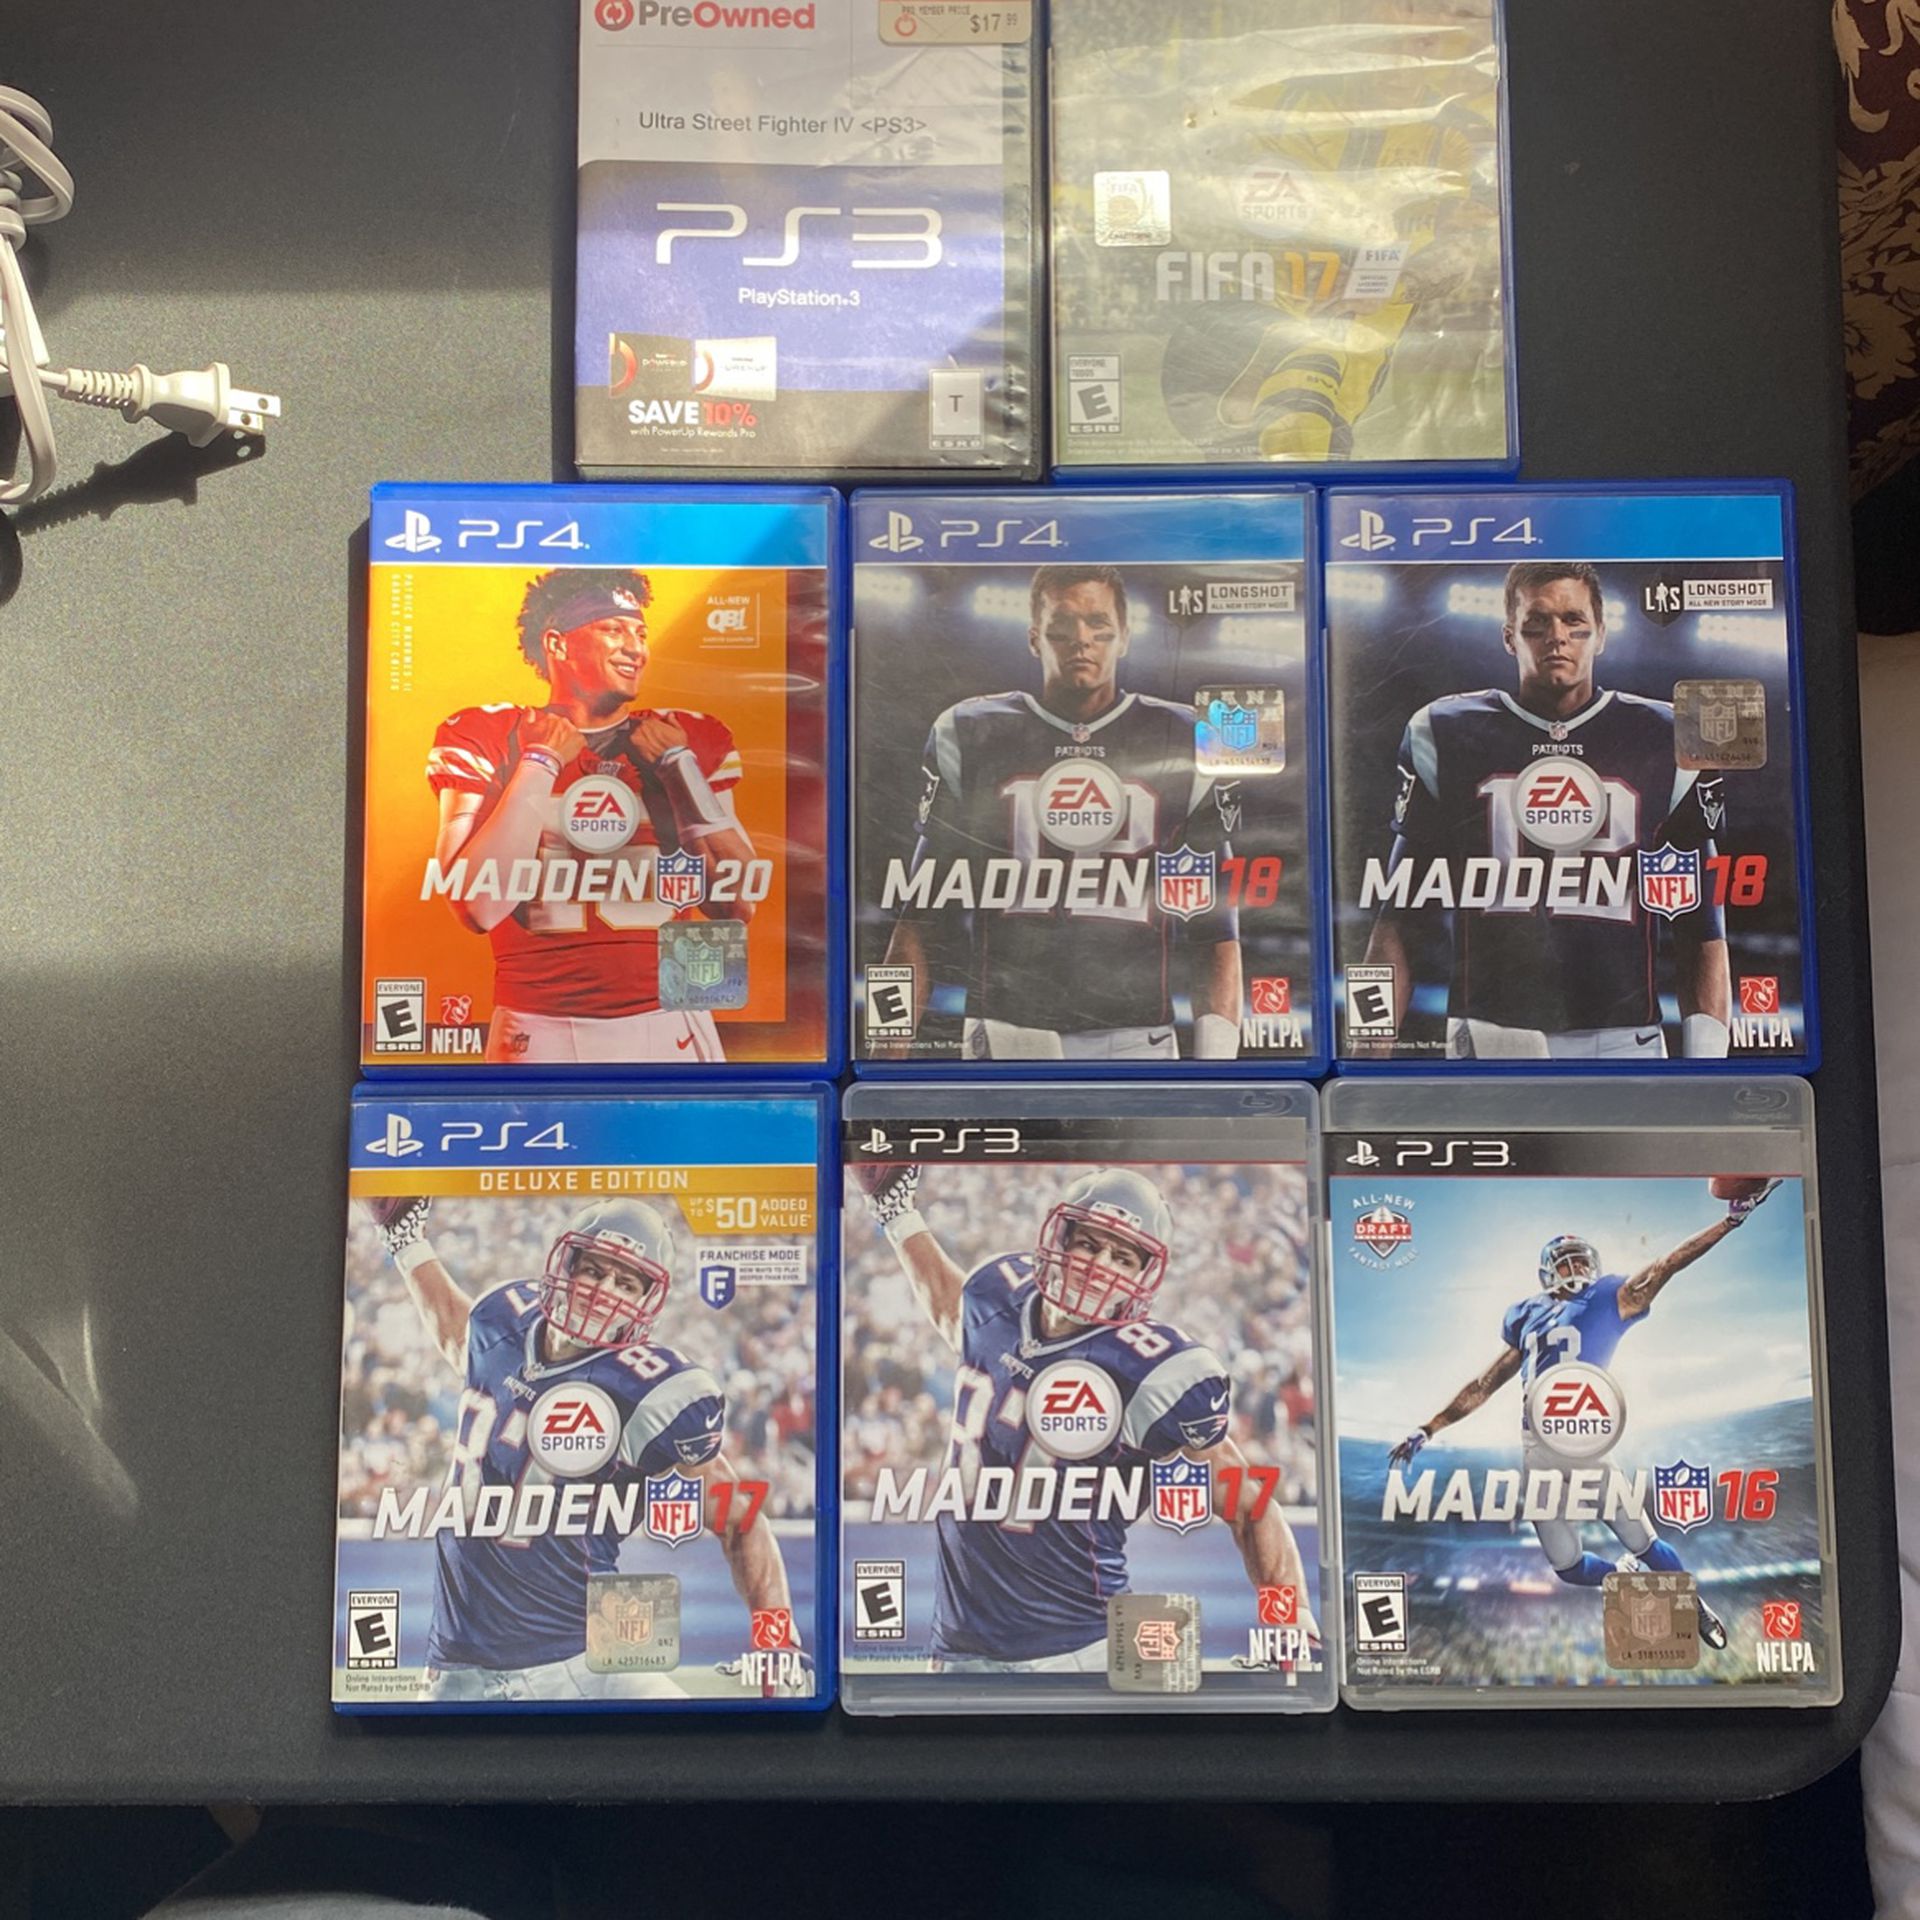 Battlefield 4 and 5 (PS3) for Sale in Santa Ana, CA - OfferUp